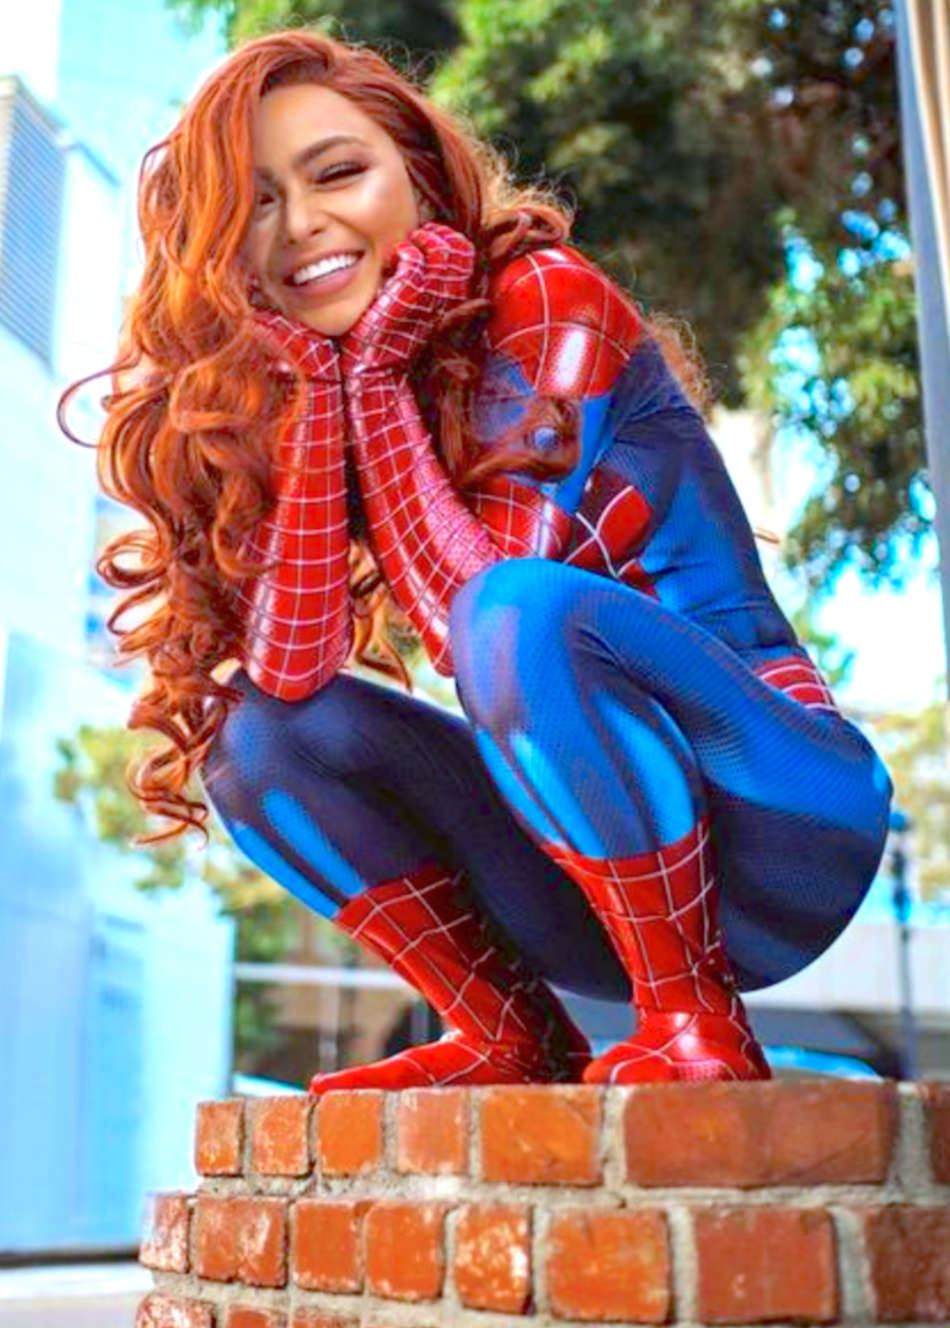 Sexy Red Hot Cosplay Girls Spiderman Women Best Photo Compilation 2021 (89 HQ Photos) 194